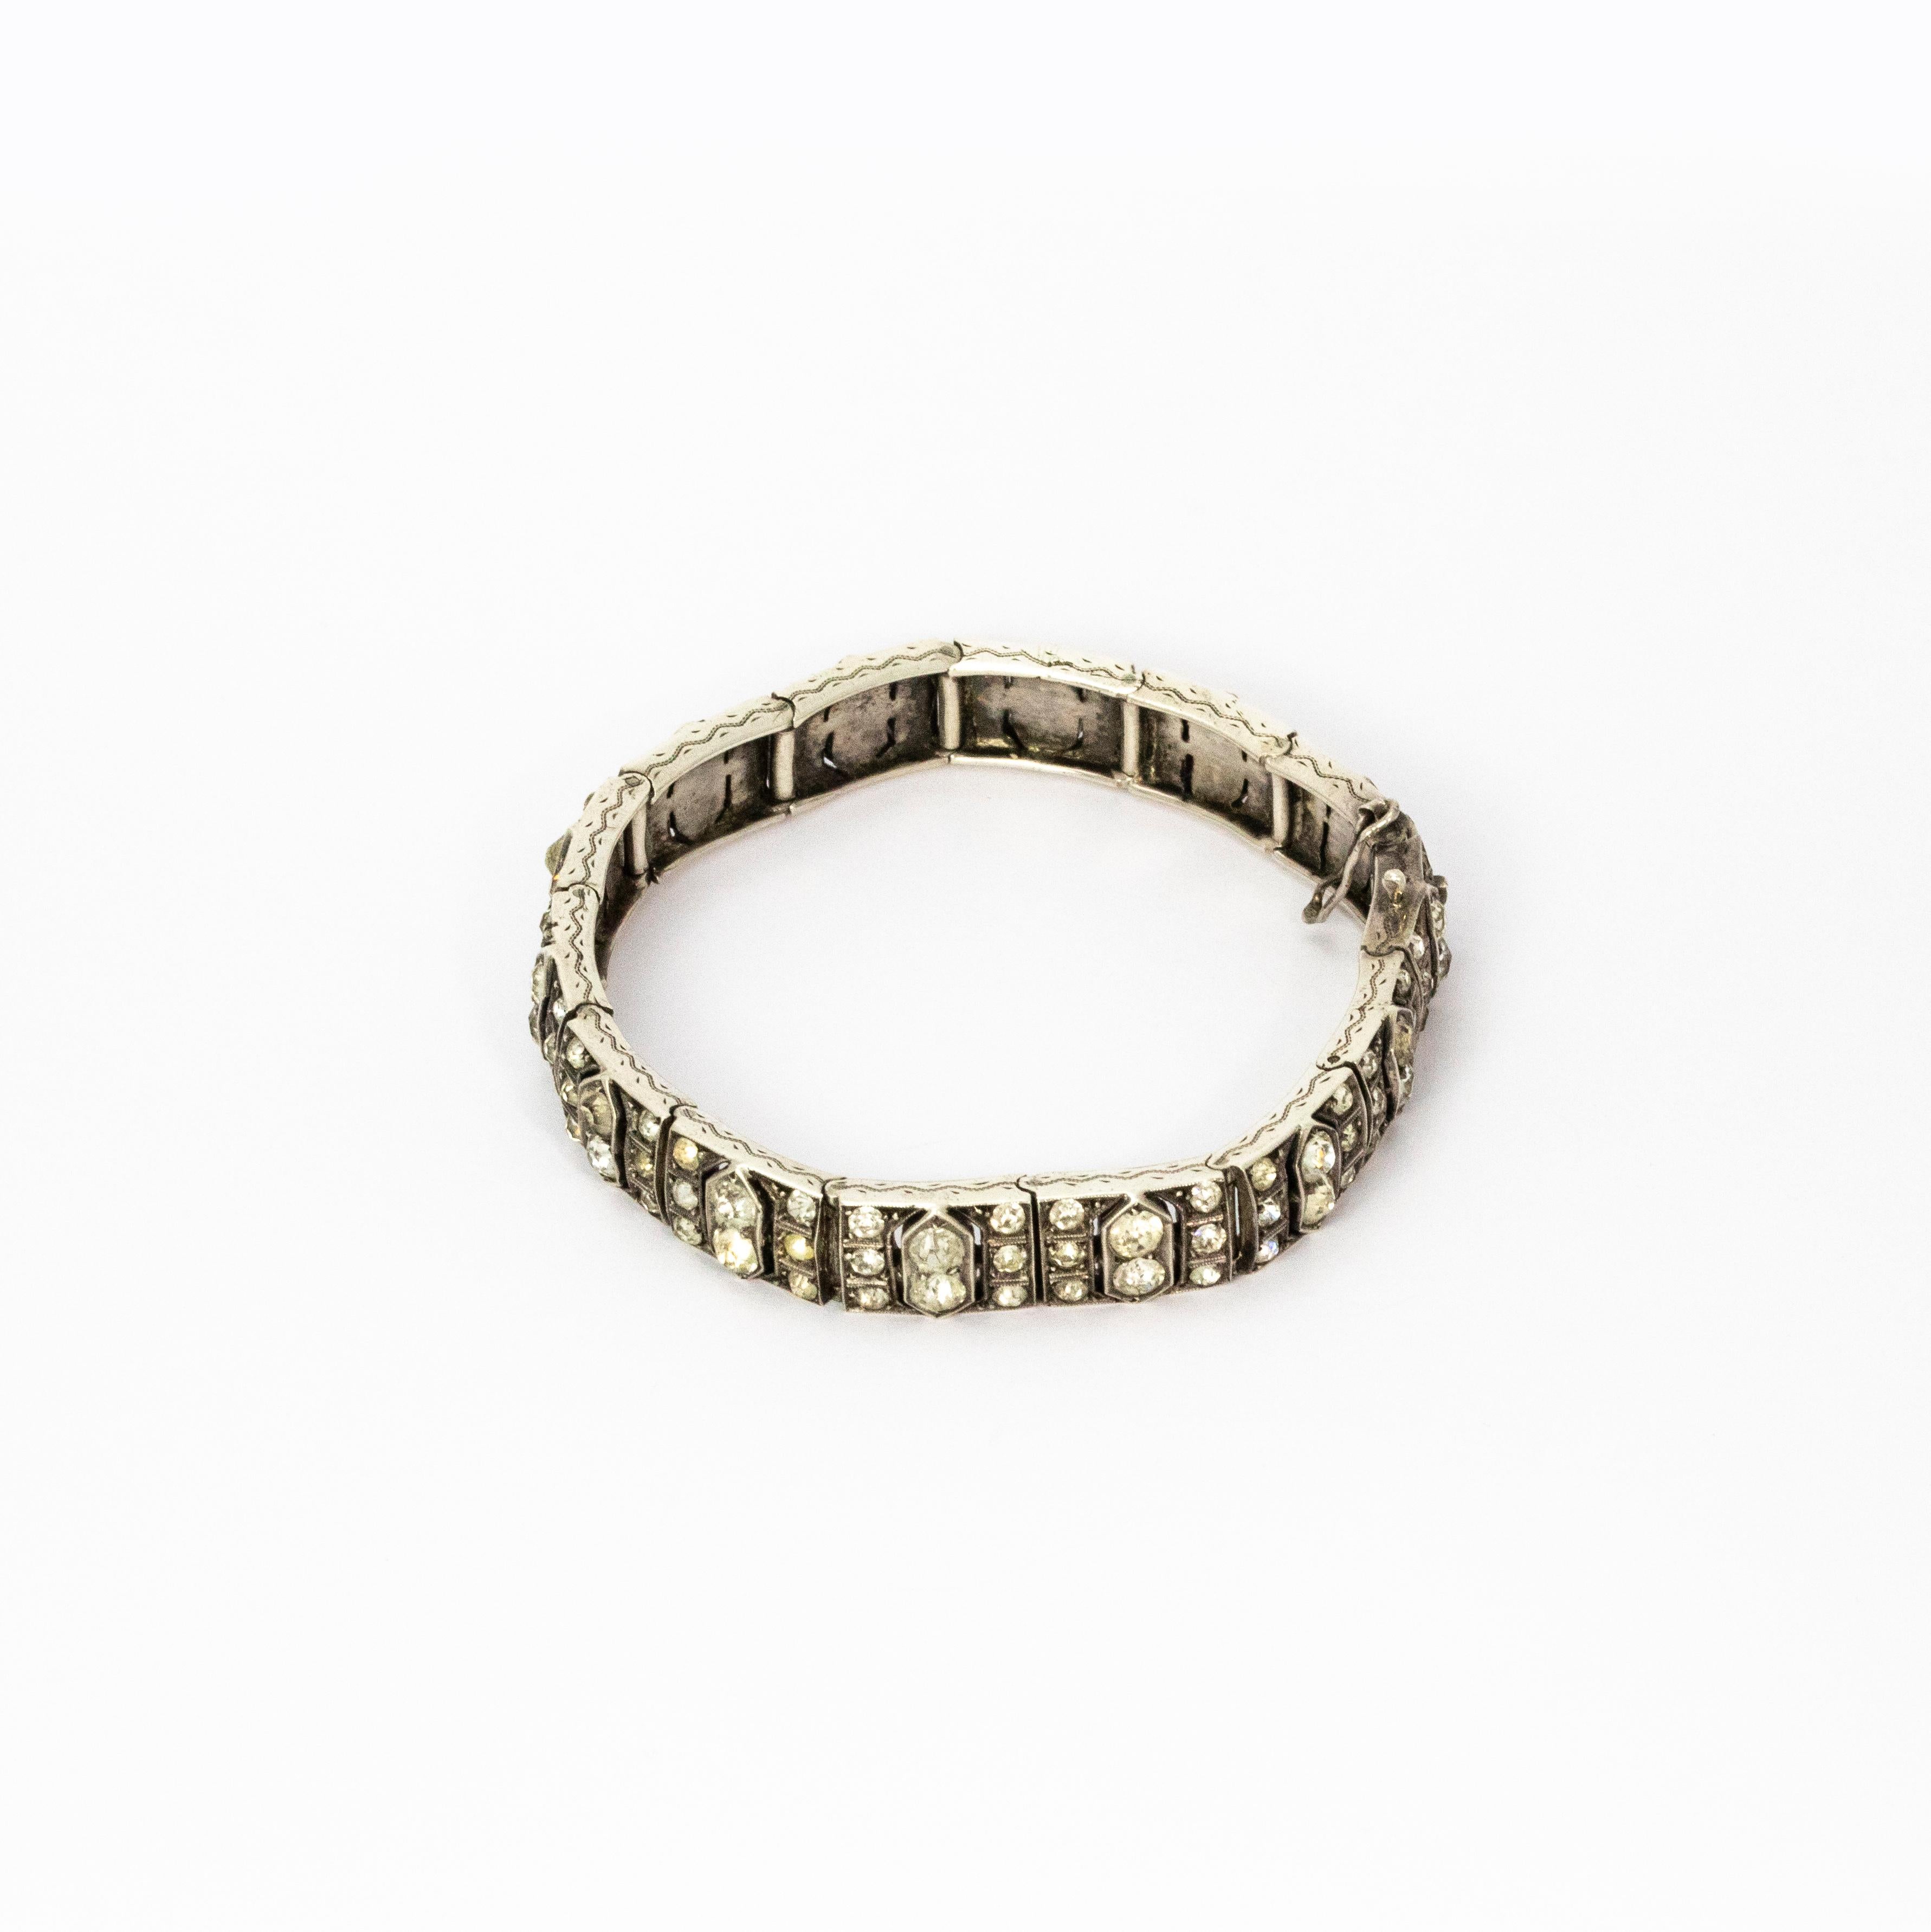 A pretty Art Deco bracelet with fourteen segments set with paste and modelled in hallmarked 9 karat white gold. Great quality. 

Open Length: 18.5 cm 